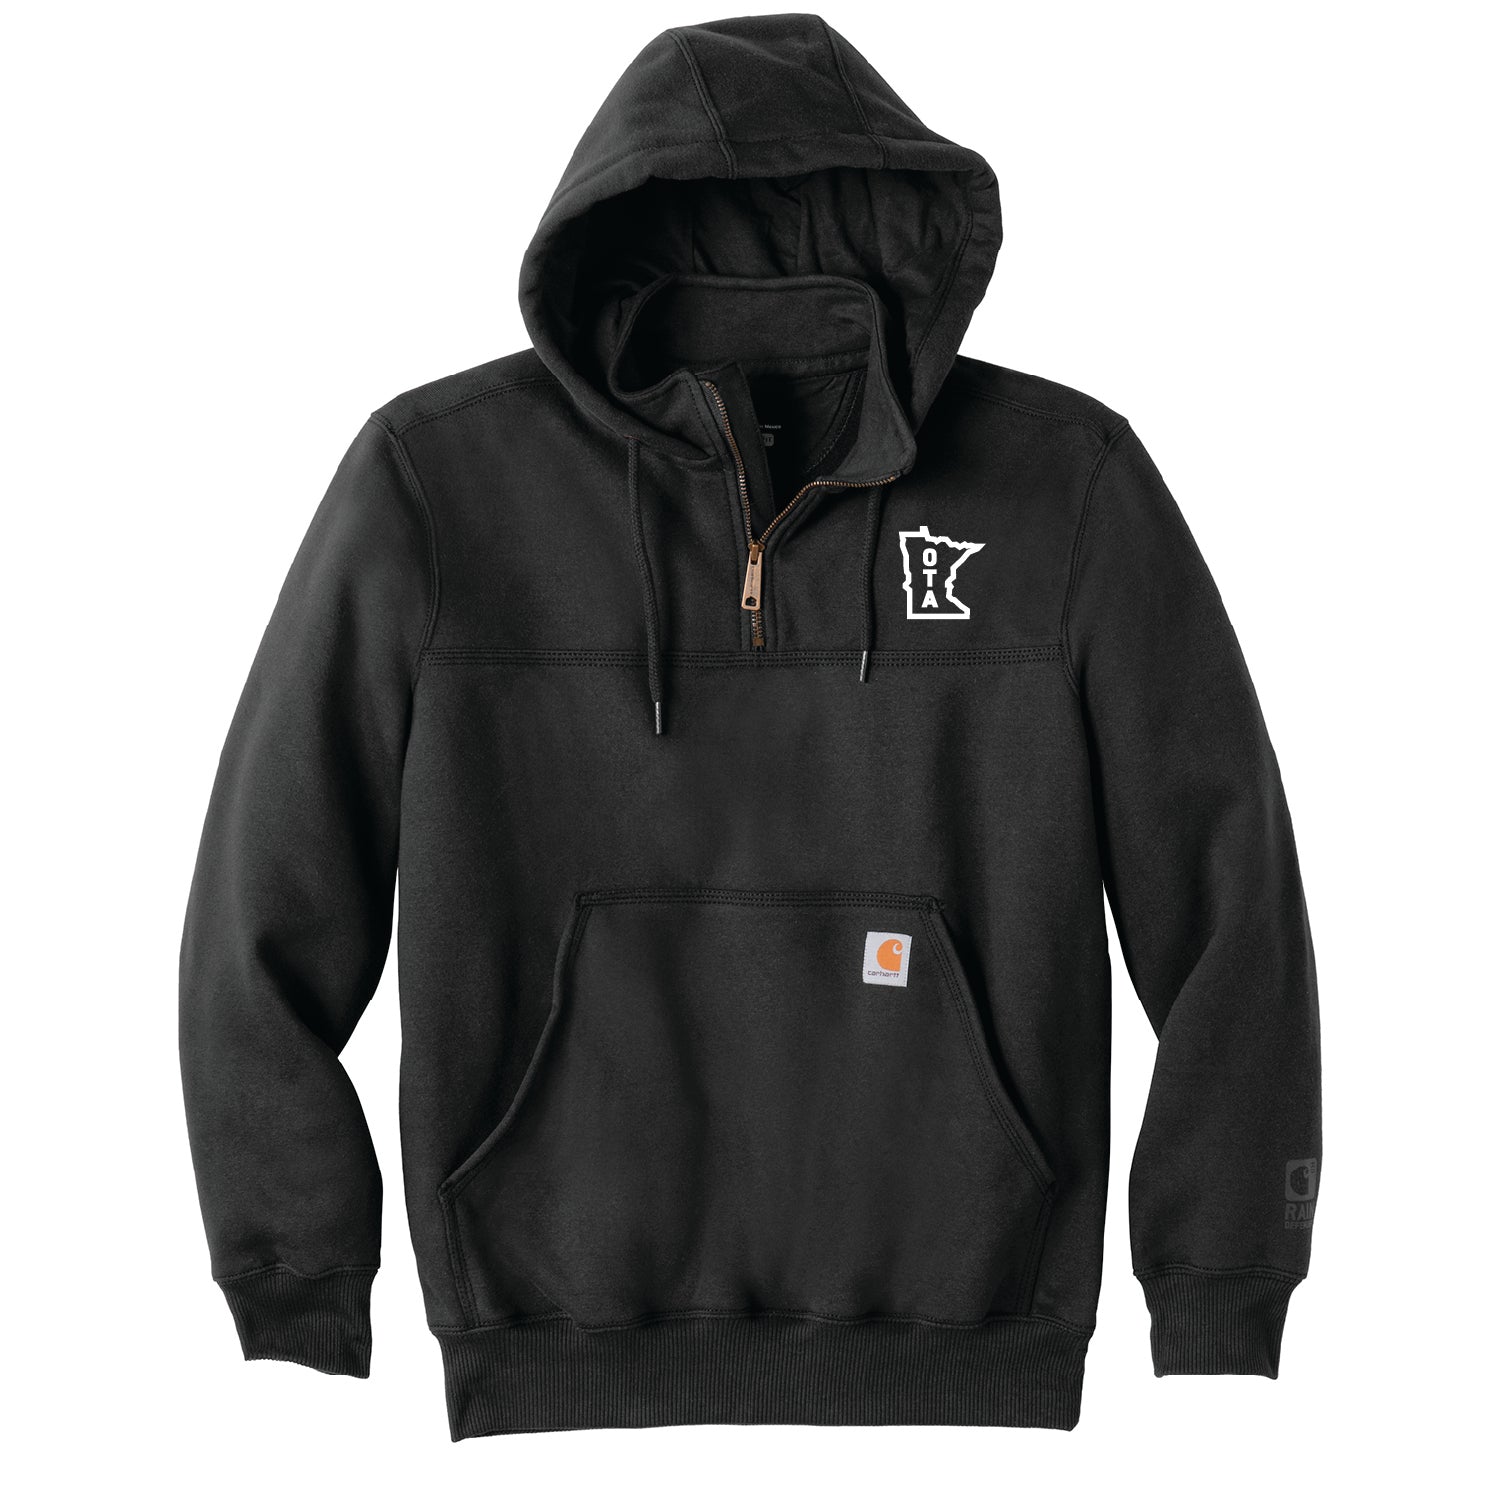 Out There Advertising Carhartt Heavyweight Hooded Zip Mock Sweatshirt - DSP On Demand